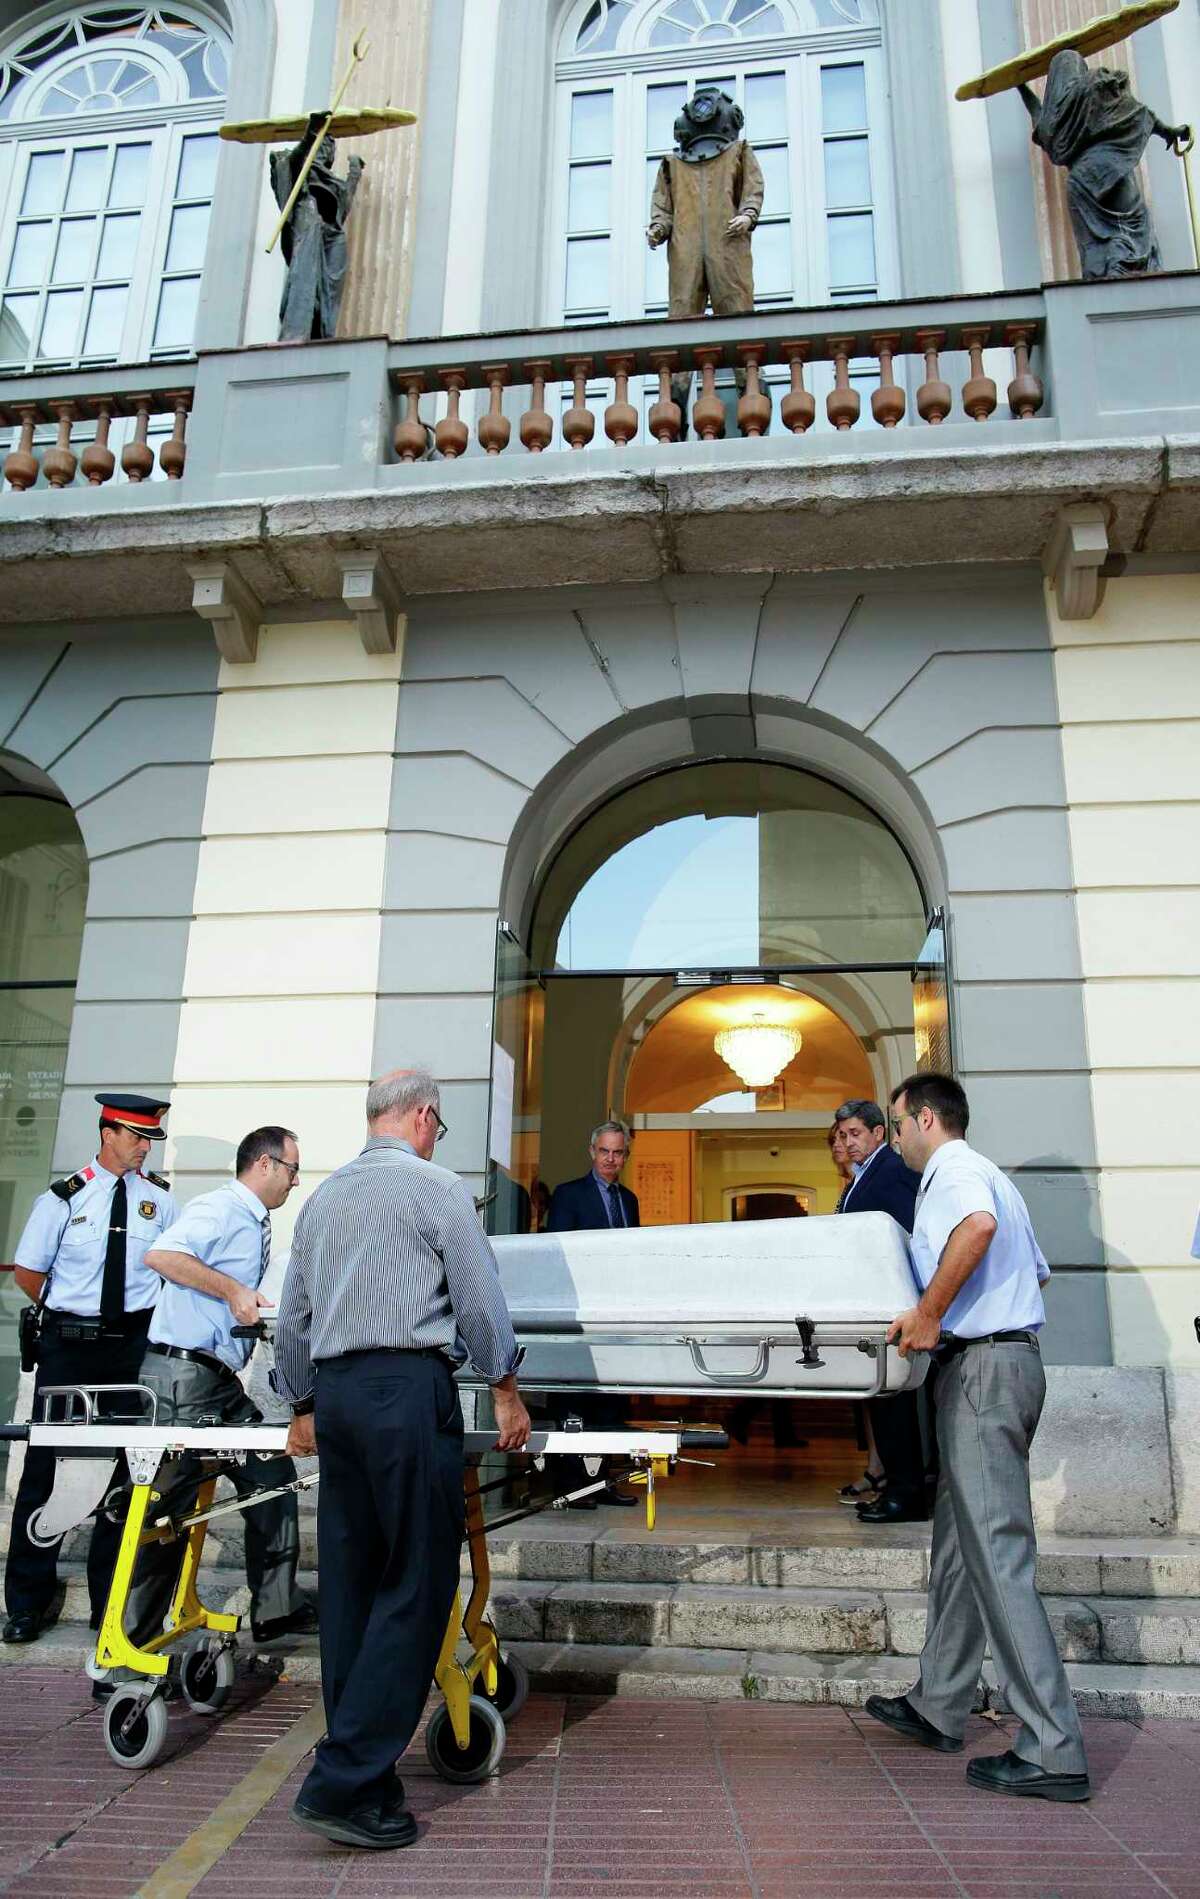 Workers bring a casket to the Dali Theater Museum in Figueres, Spain, Thursday, July 20, 2017. Salvador Dali's eccentric artistic and personal history took yet another bizarre turn Thursday with the exhumation of his embalmed remains in order to find genetic samples that could settle whether one of the founding figures of surrealism fathered a daughter decades ago. (AP Photo/Manu Fernandez)